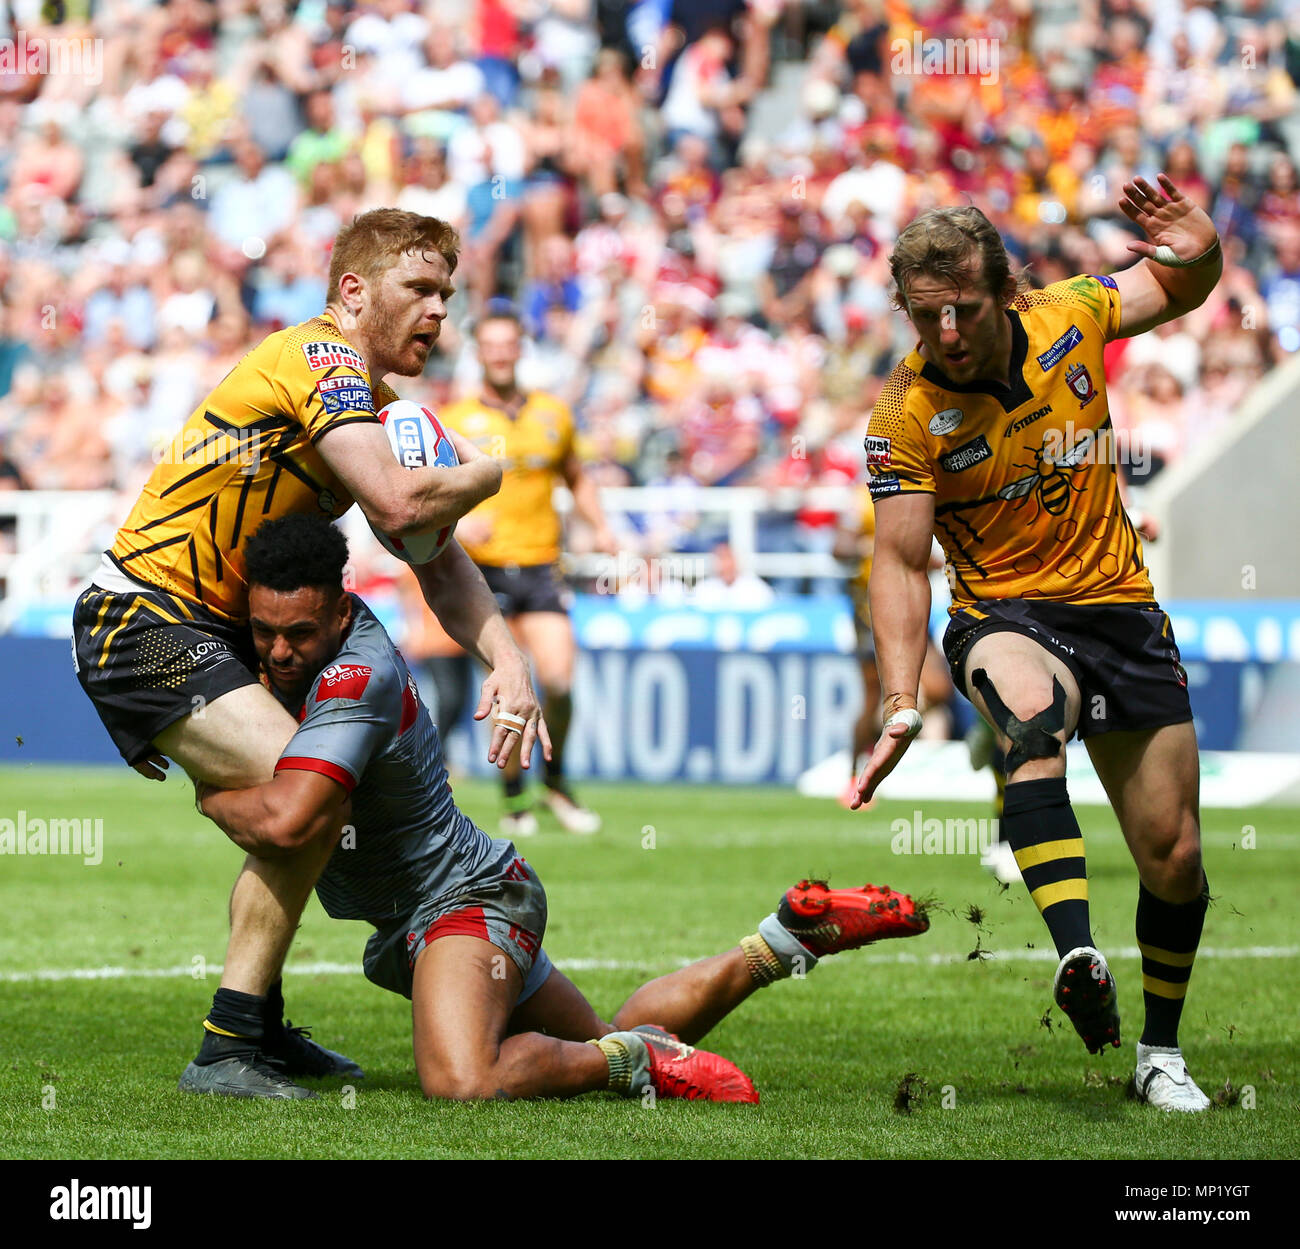 St James Park, Newcastle, UK. 20th May, 2018. Dacia Magic Weekend of Rugby League; Salford Red Devils versus Catalan Dragons; Kris Welham of Salford Red Devils is tackled by Jodie Broughton of Catalan Dragons with Logan Tomkins of Salford Red Devils taking evasive action Credit: Action Plus Sports/Alamy Live News Stock Photo